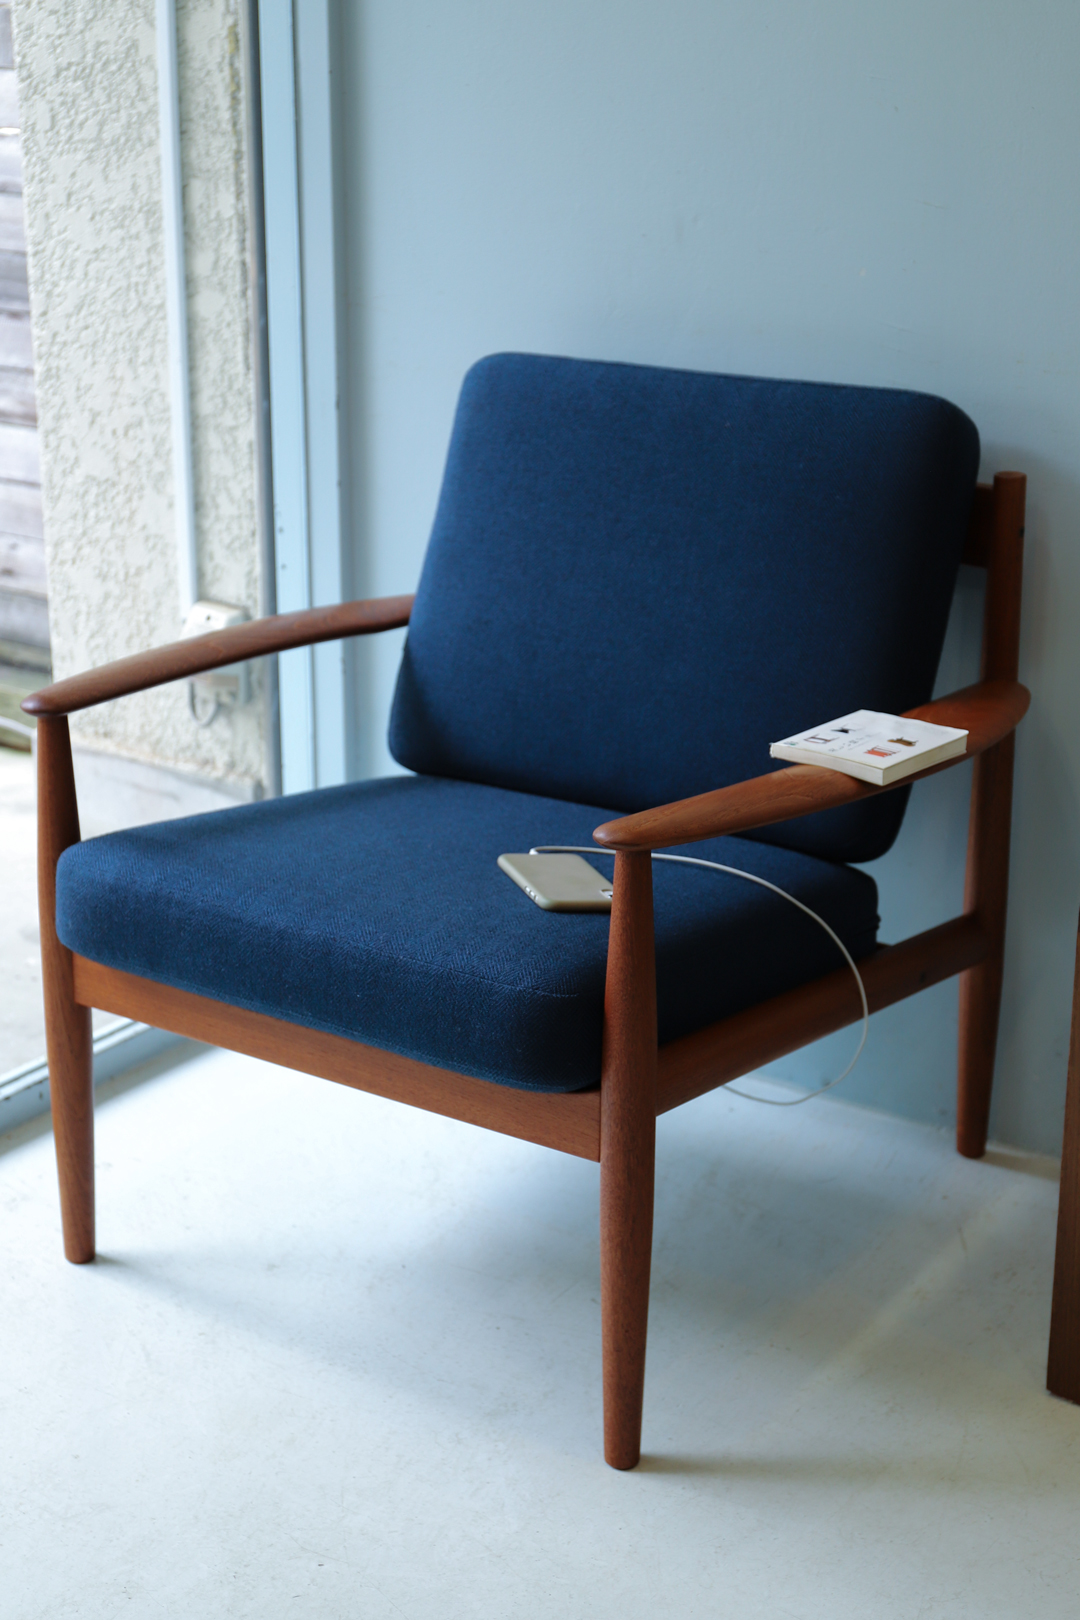 France & Søn Easy Chair Grete Jalk model 118/フランス&サン イージーチェア グレーテ・ヤルク デンマーク 北欧ヴィンテージ 1Pソファ